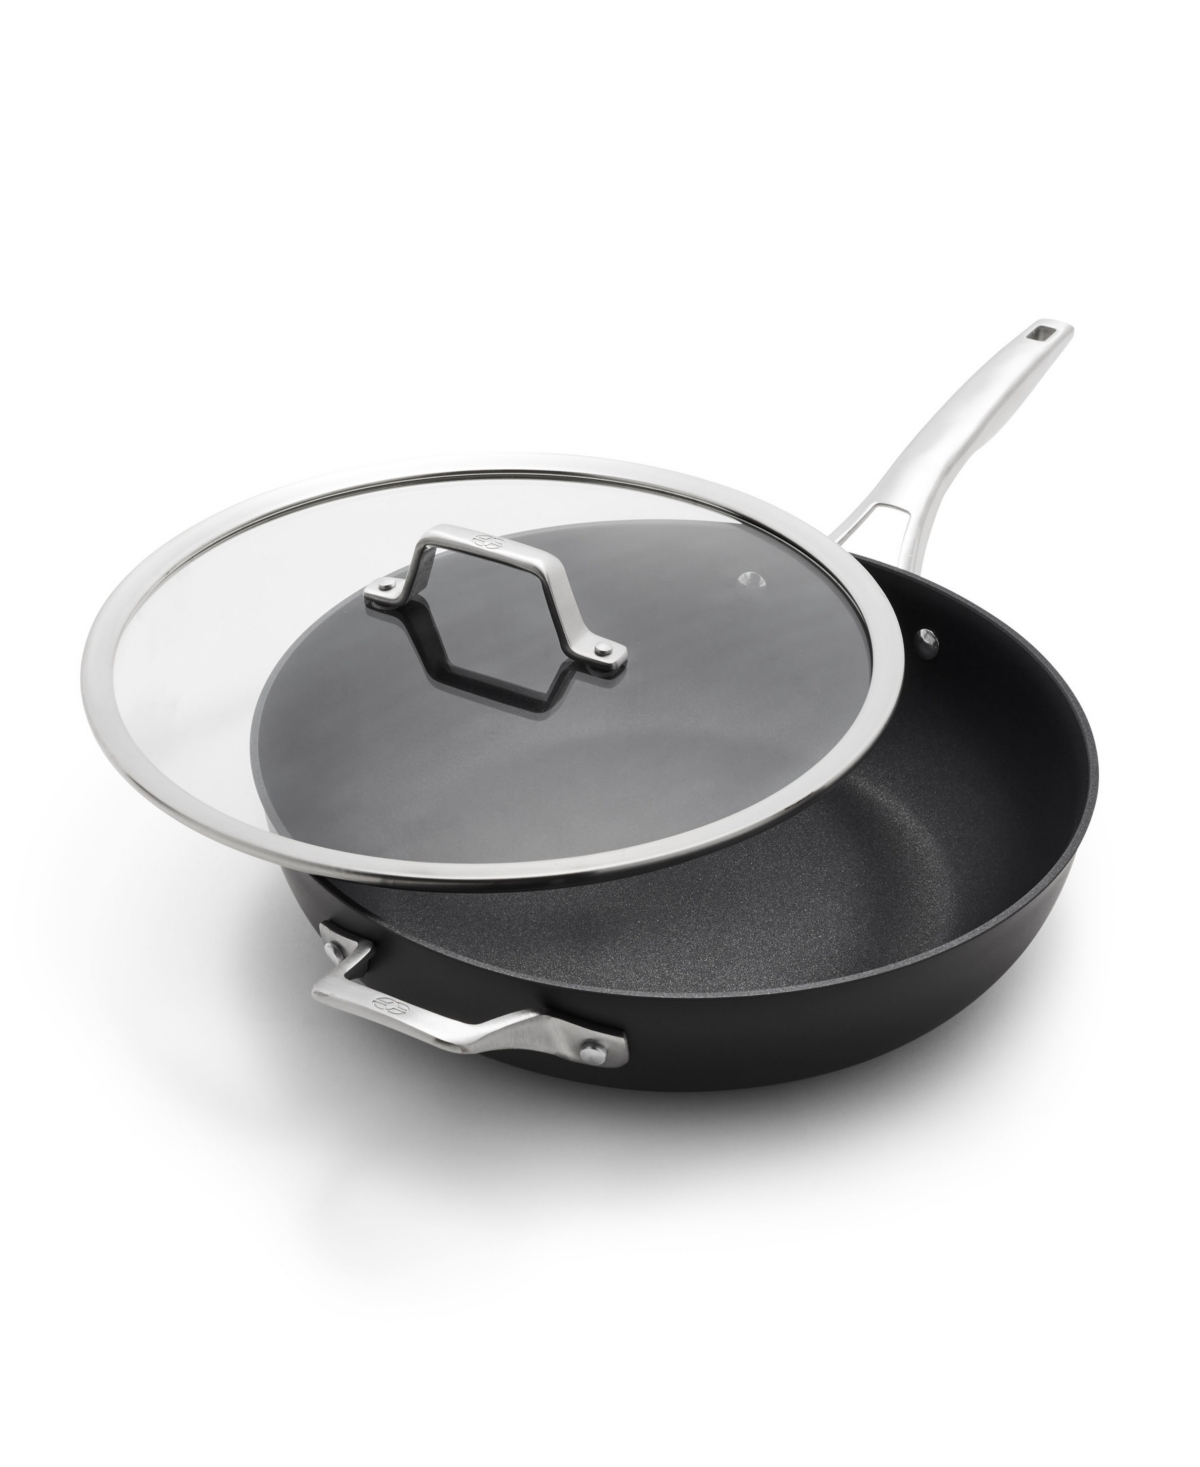 Calphalon Premier Hard-anodized Aluminum Nonstick 13" Deep Skillet With Lid In Black,stainless Steel